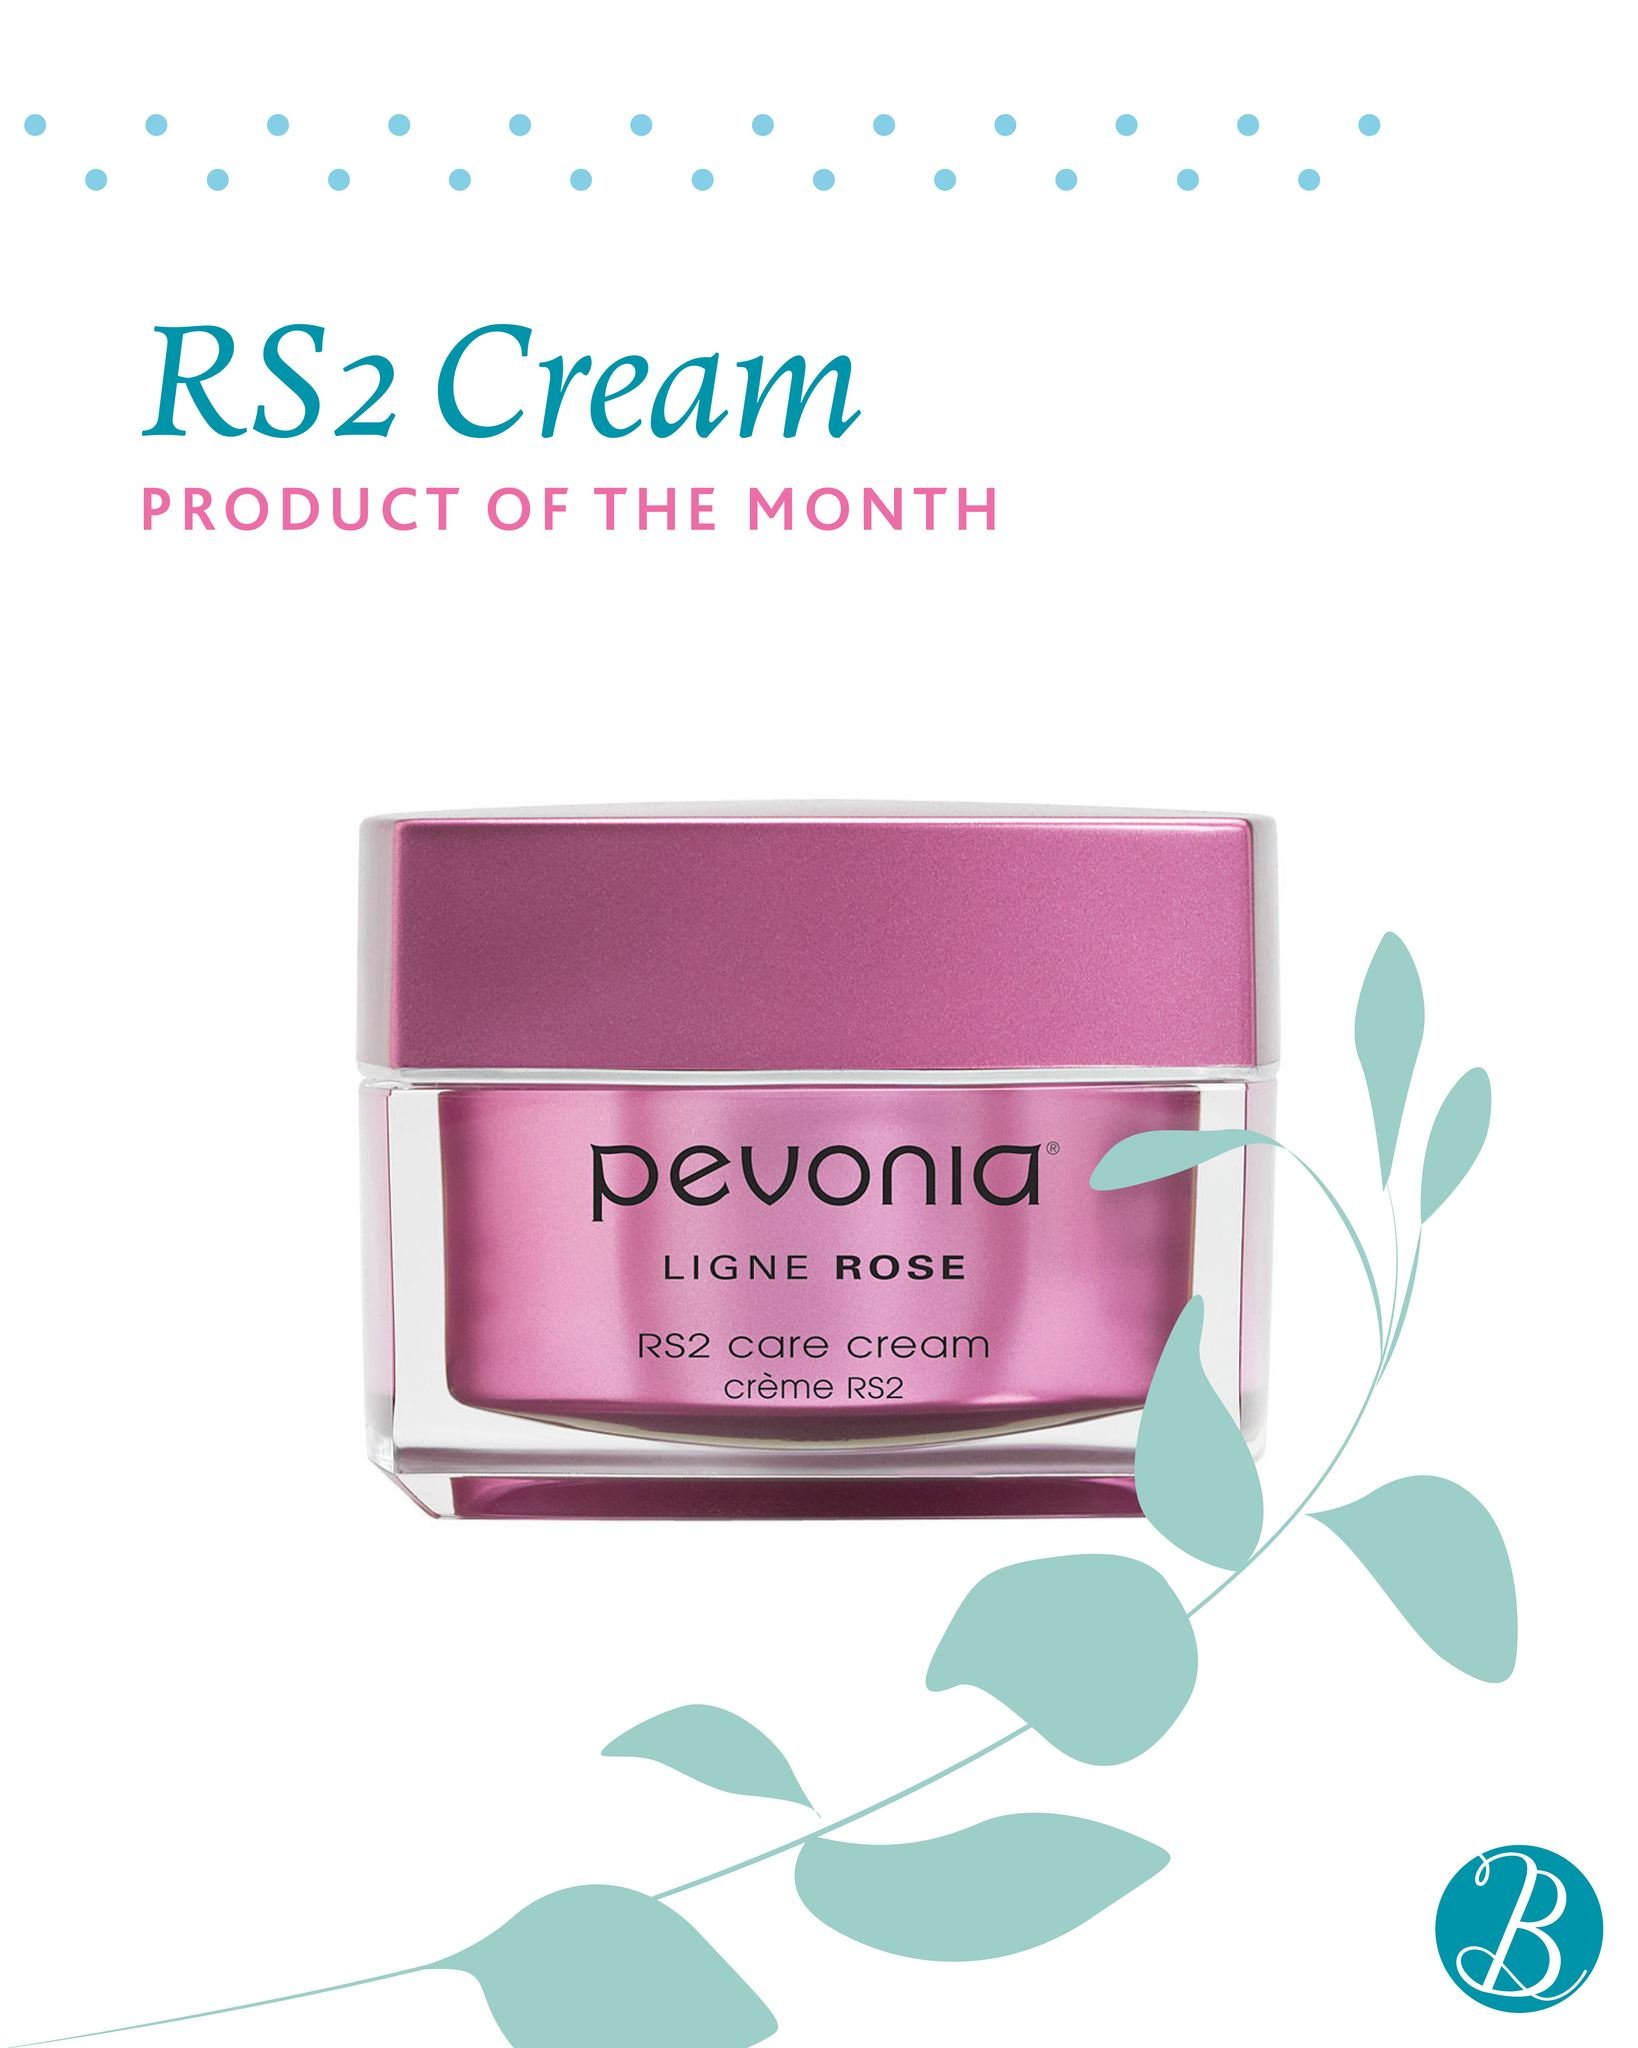 Product of the Month &ndash; Pevonia RS2 Cream.

For &lsquo;Rosacea Awareness Month&rsquo;, purchase an RS2 Cream 50ml and receive a free Travel size RS2 Cleanser, RS2 Lotion, and Eye Make-Up Remover NOW &pound;85 (worth &pound;136.30).
 
Pop into th